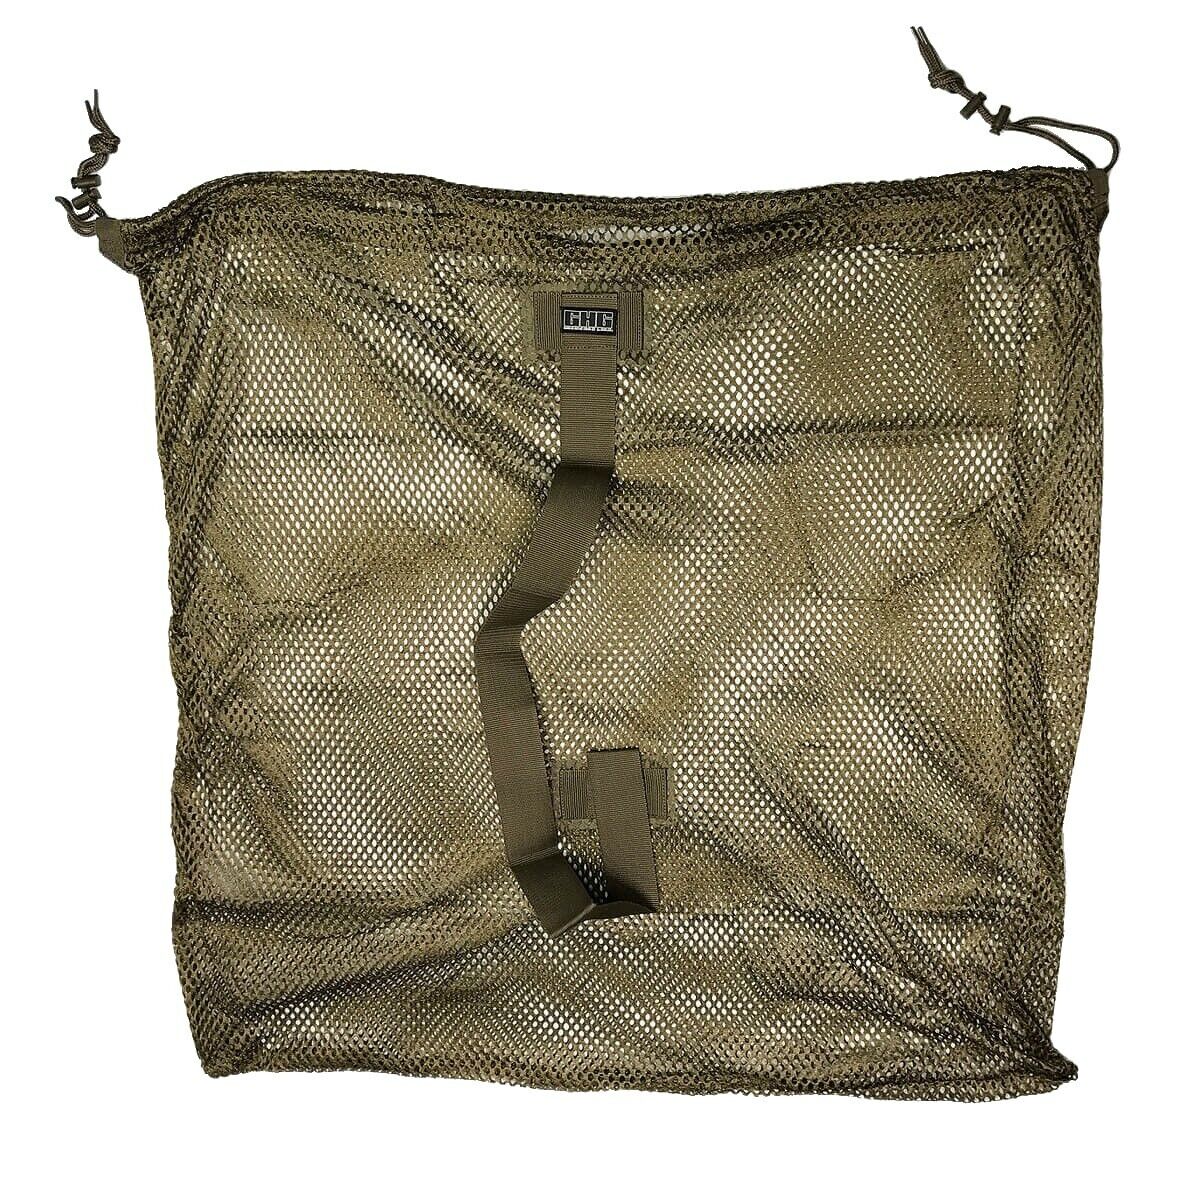 Avery Max 67% OFF Mesh Pothole Max 41% OFF Bags Decoy